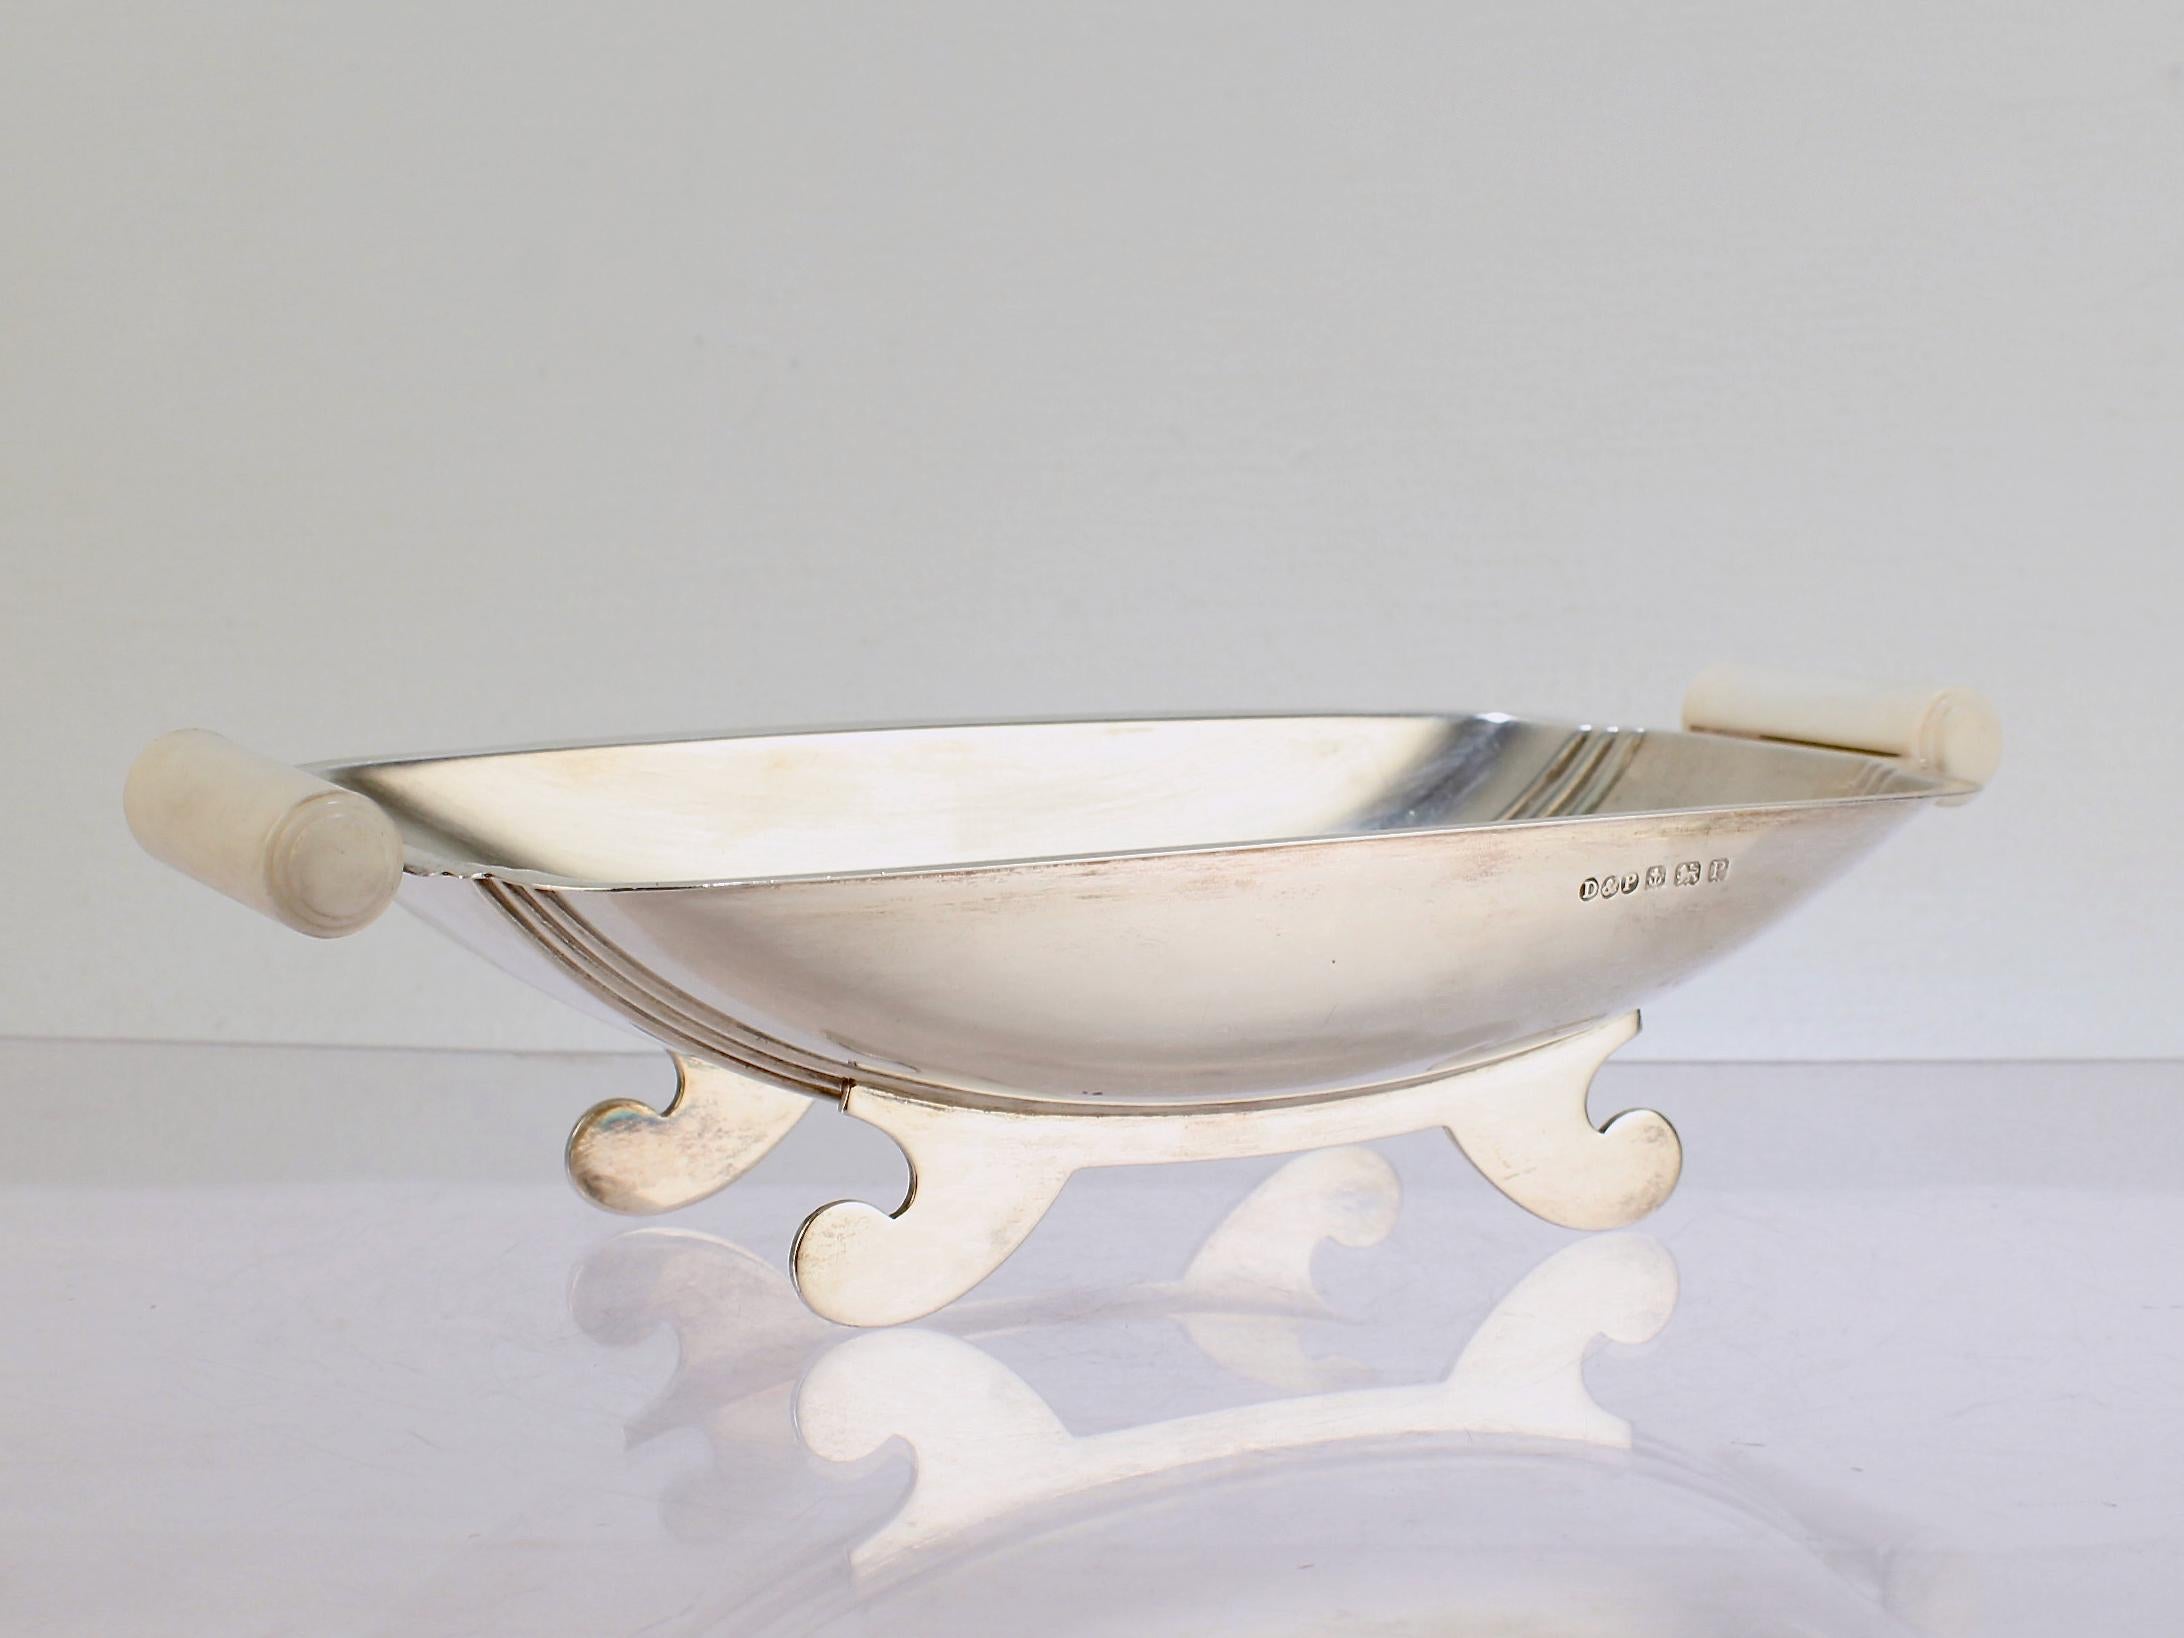 A fine Art Deco bowl in sterling silver.

By Davies & Powers of Birmingham, England. 

The bowl has curved feet and cleats supporting a shaped bowl that is mounted with 2 early white early plastic handles. These handles are likely a material